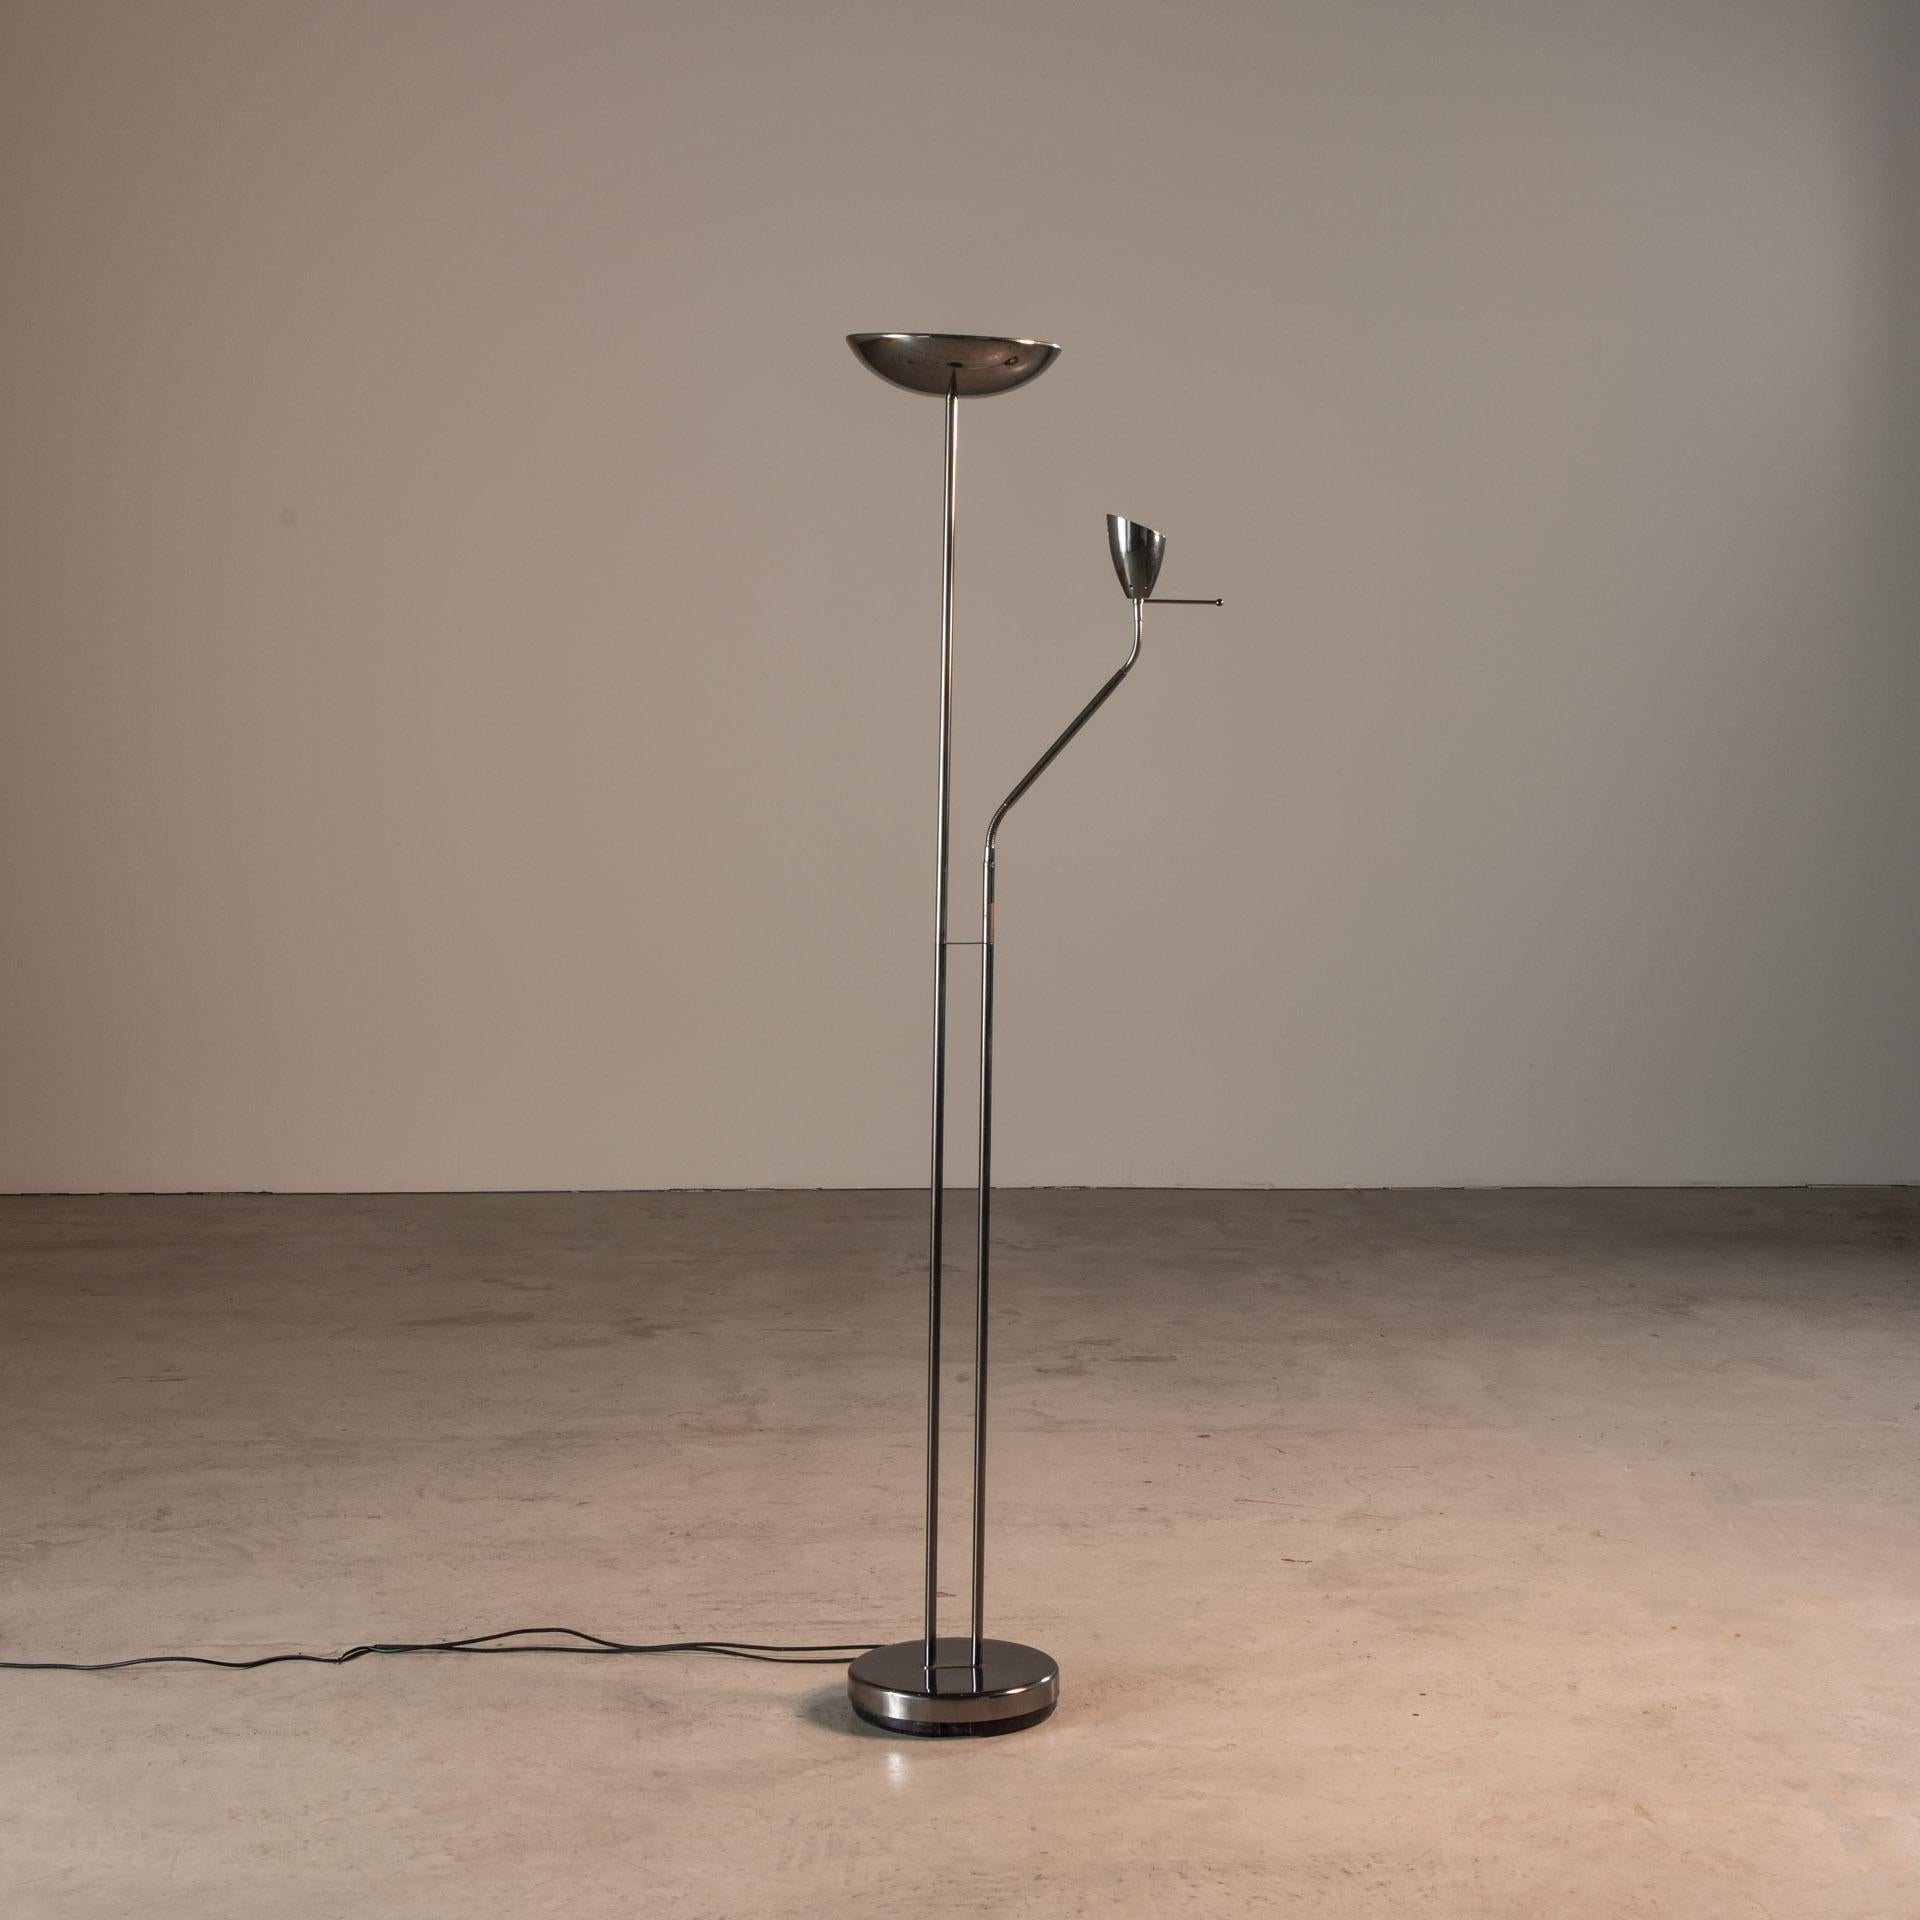 Floor Lamp in Chrome with two Arms, by Dominici, Brazilian Mid-Century Design For Sale 1